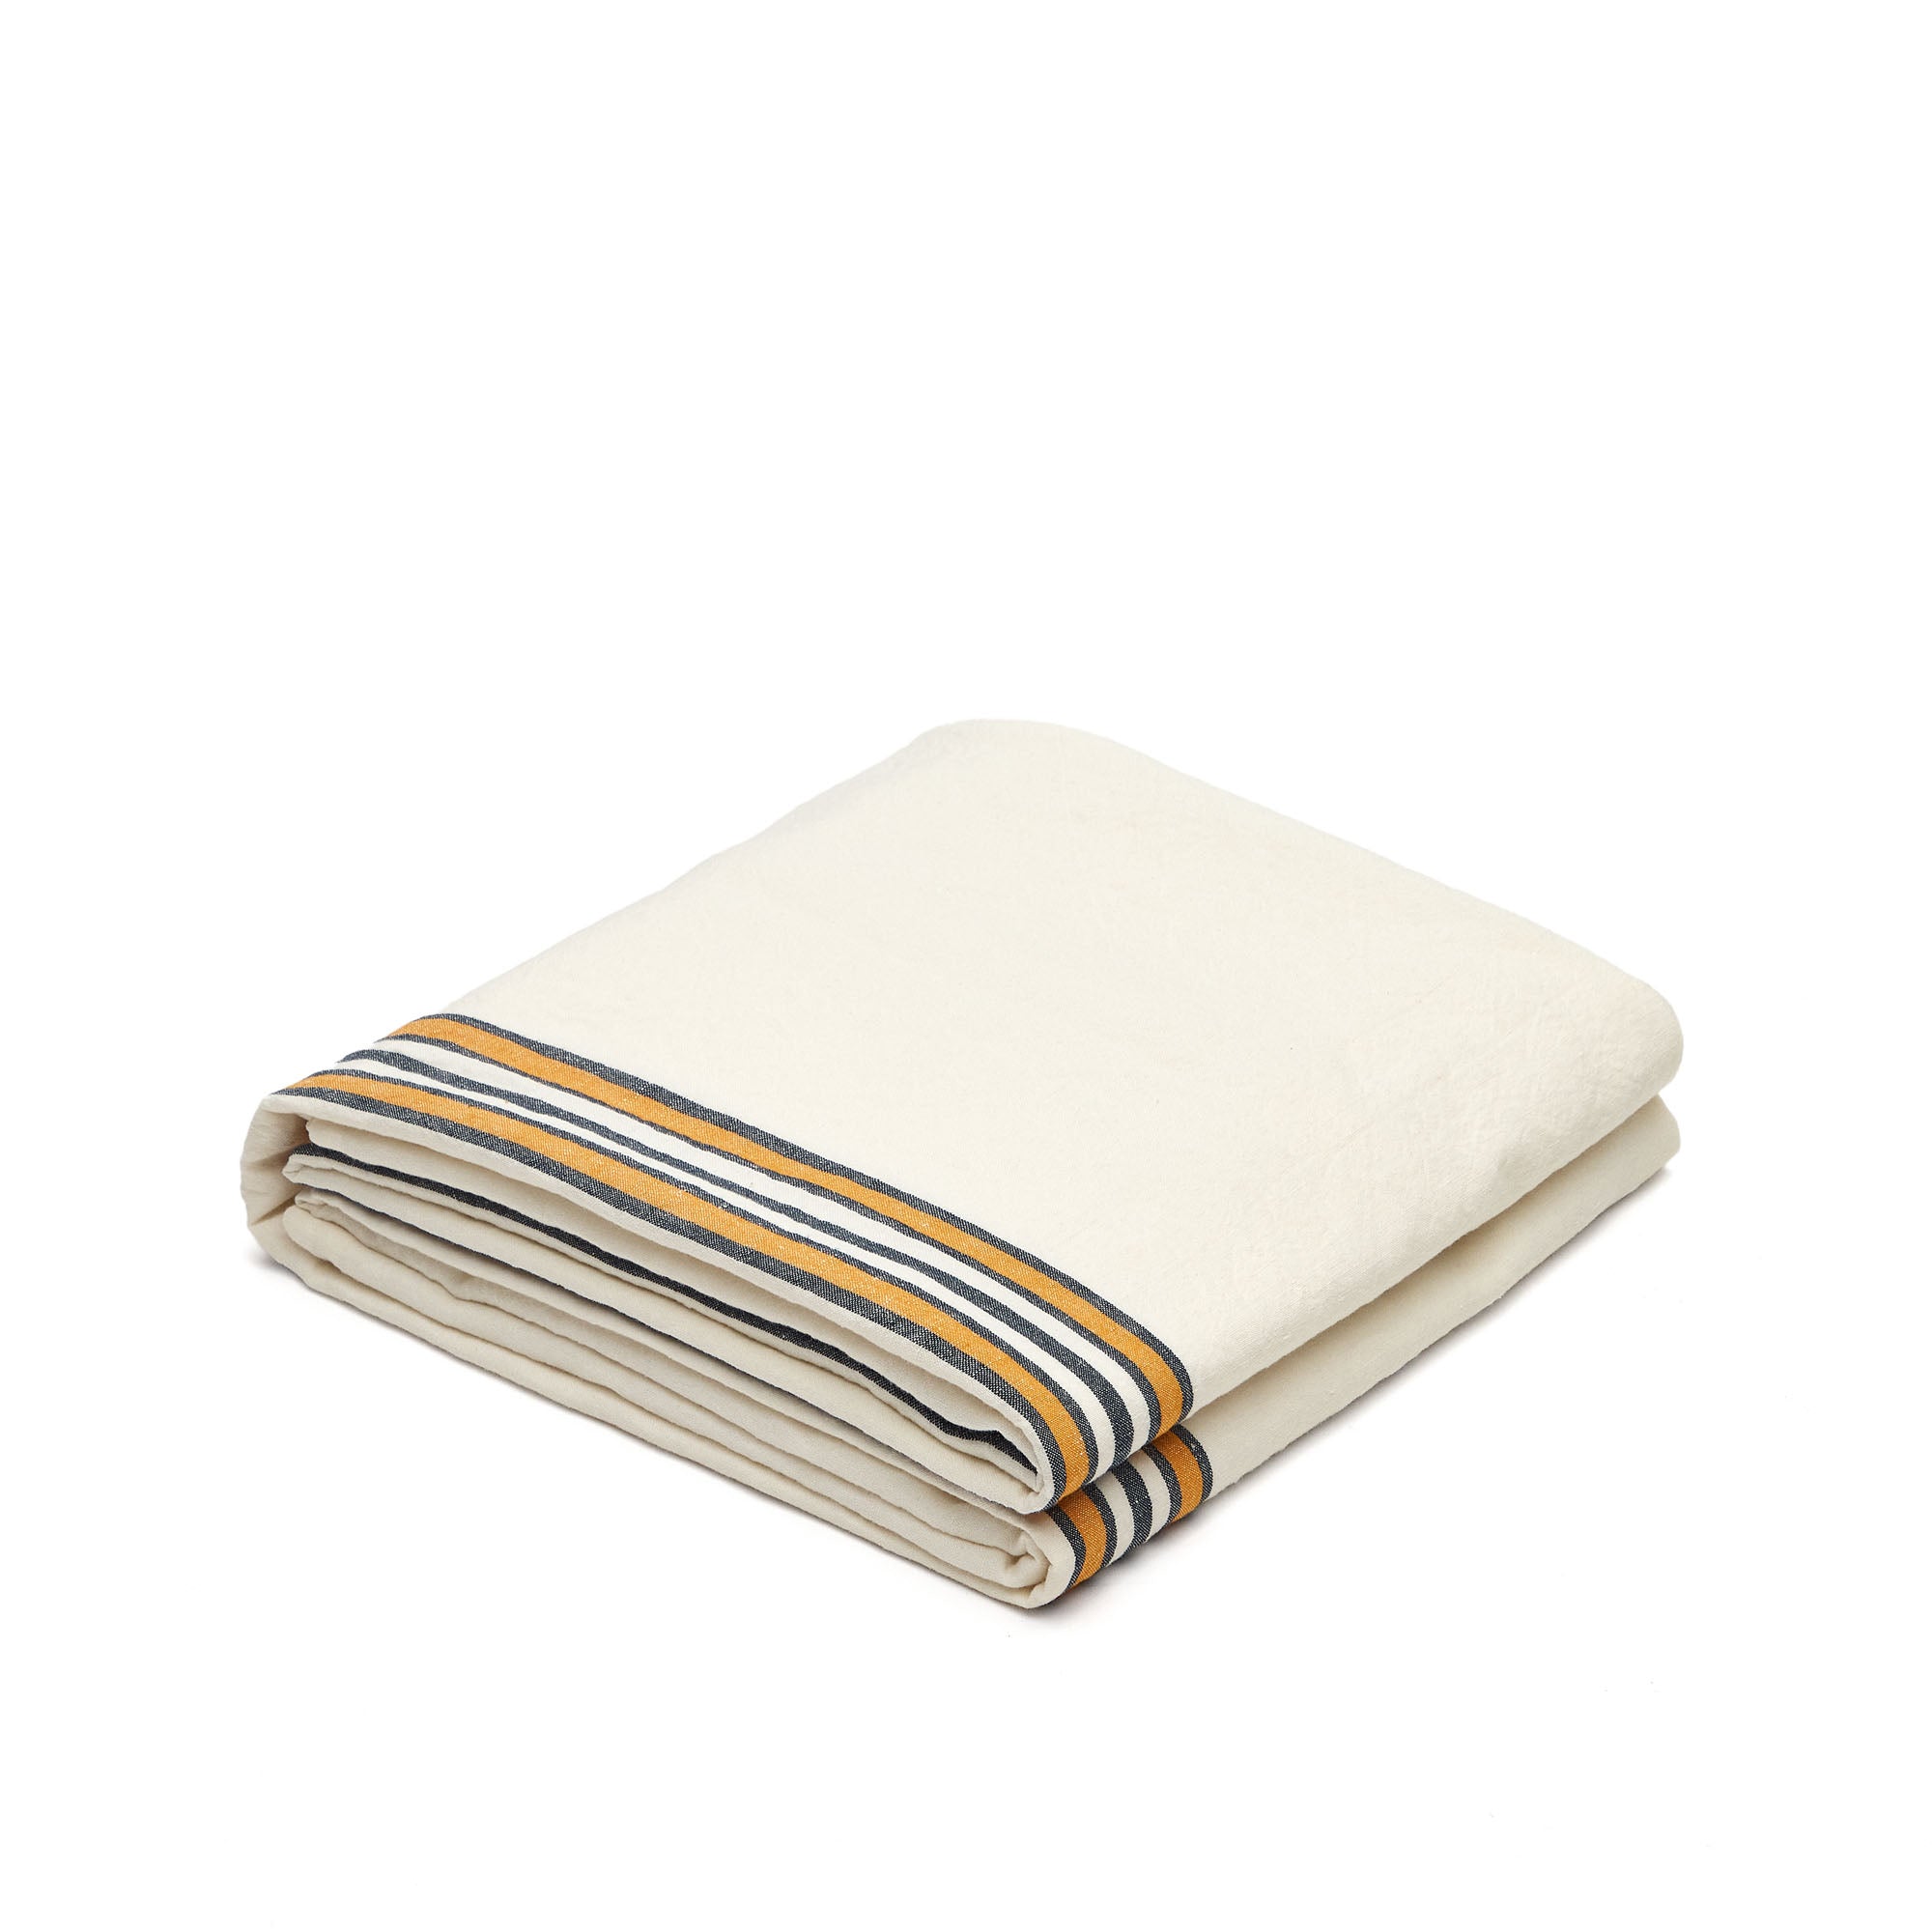 Vallcanera tablecloth in cotton and linen with mustard and blue stripes, 150 x 250 cm